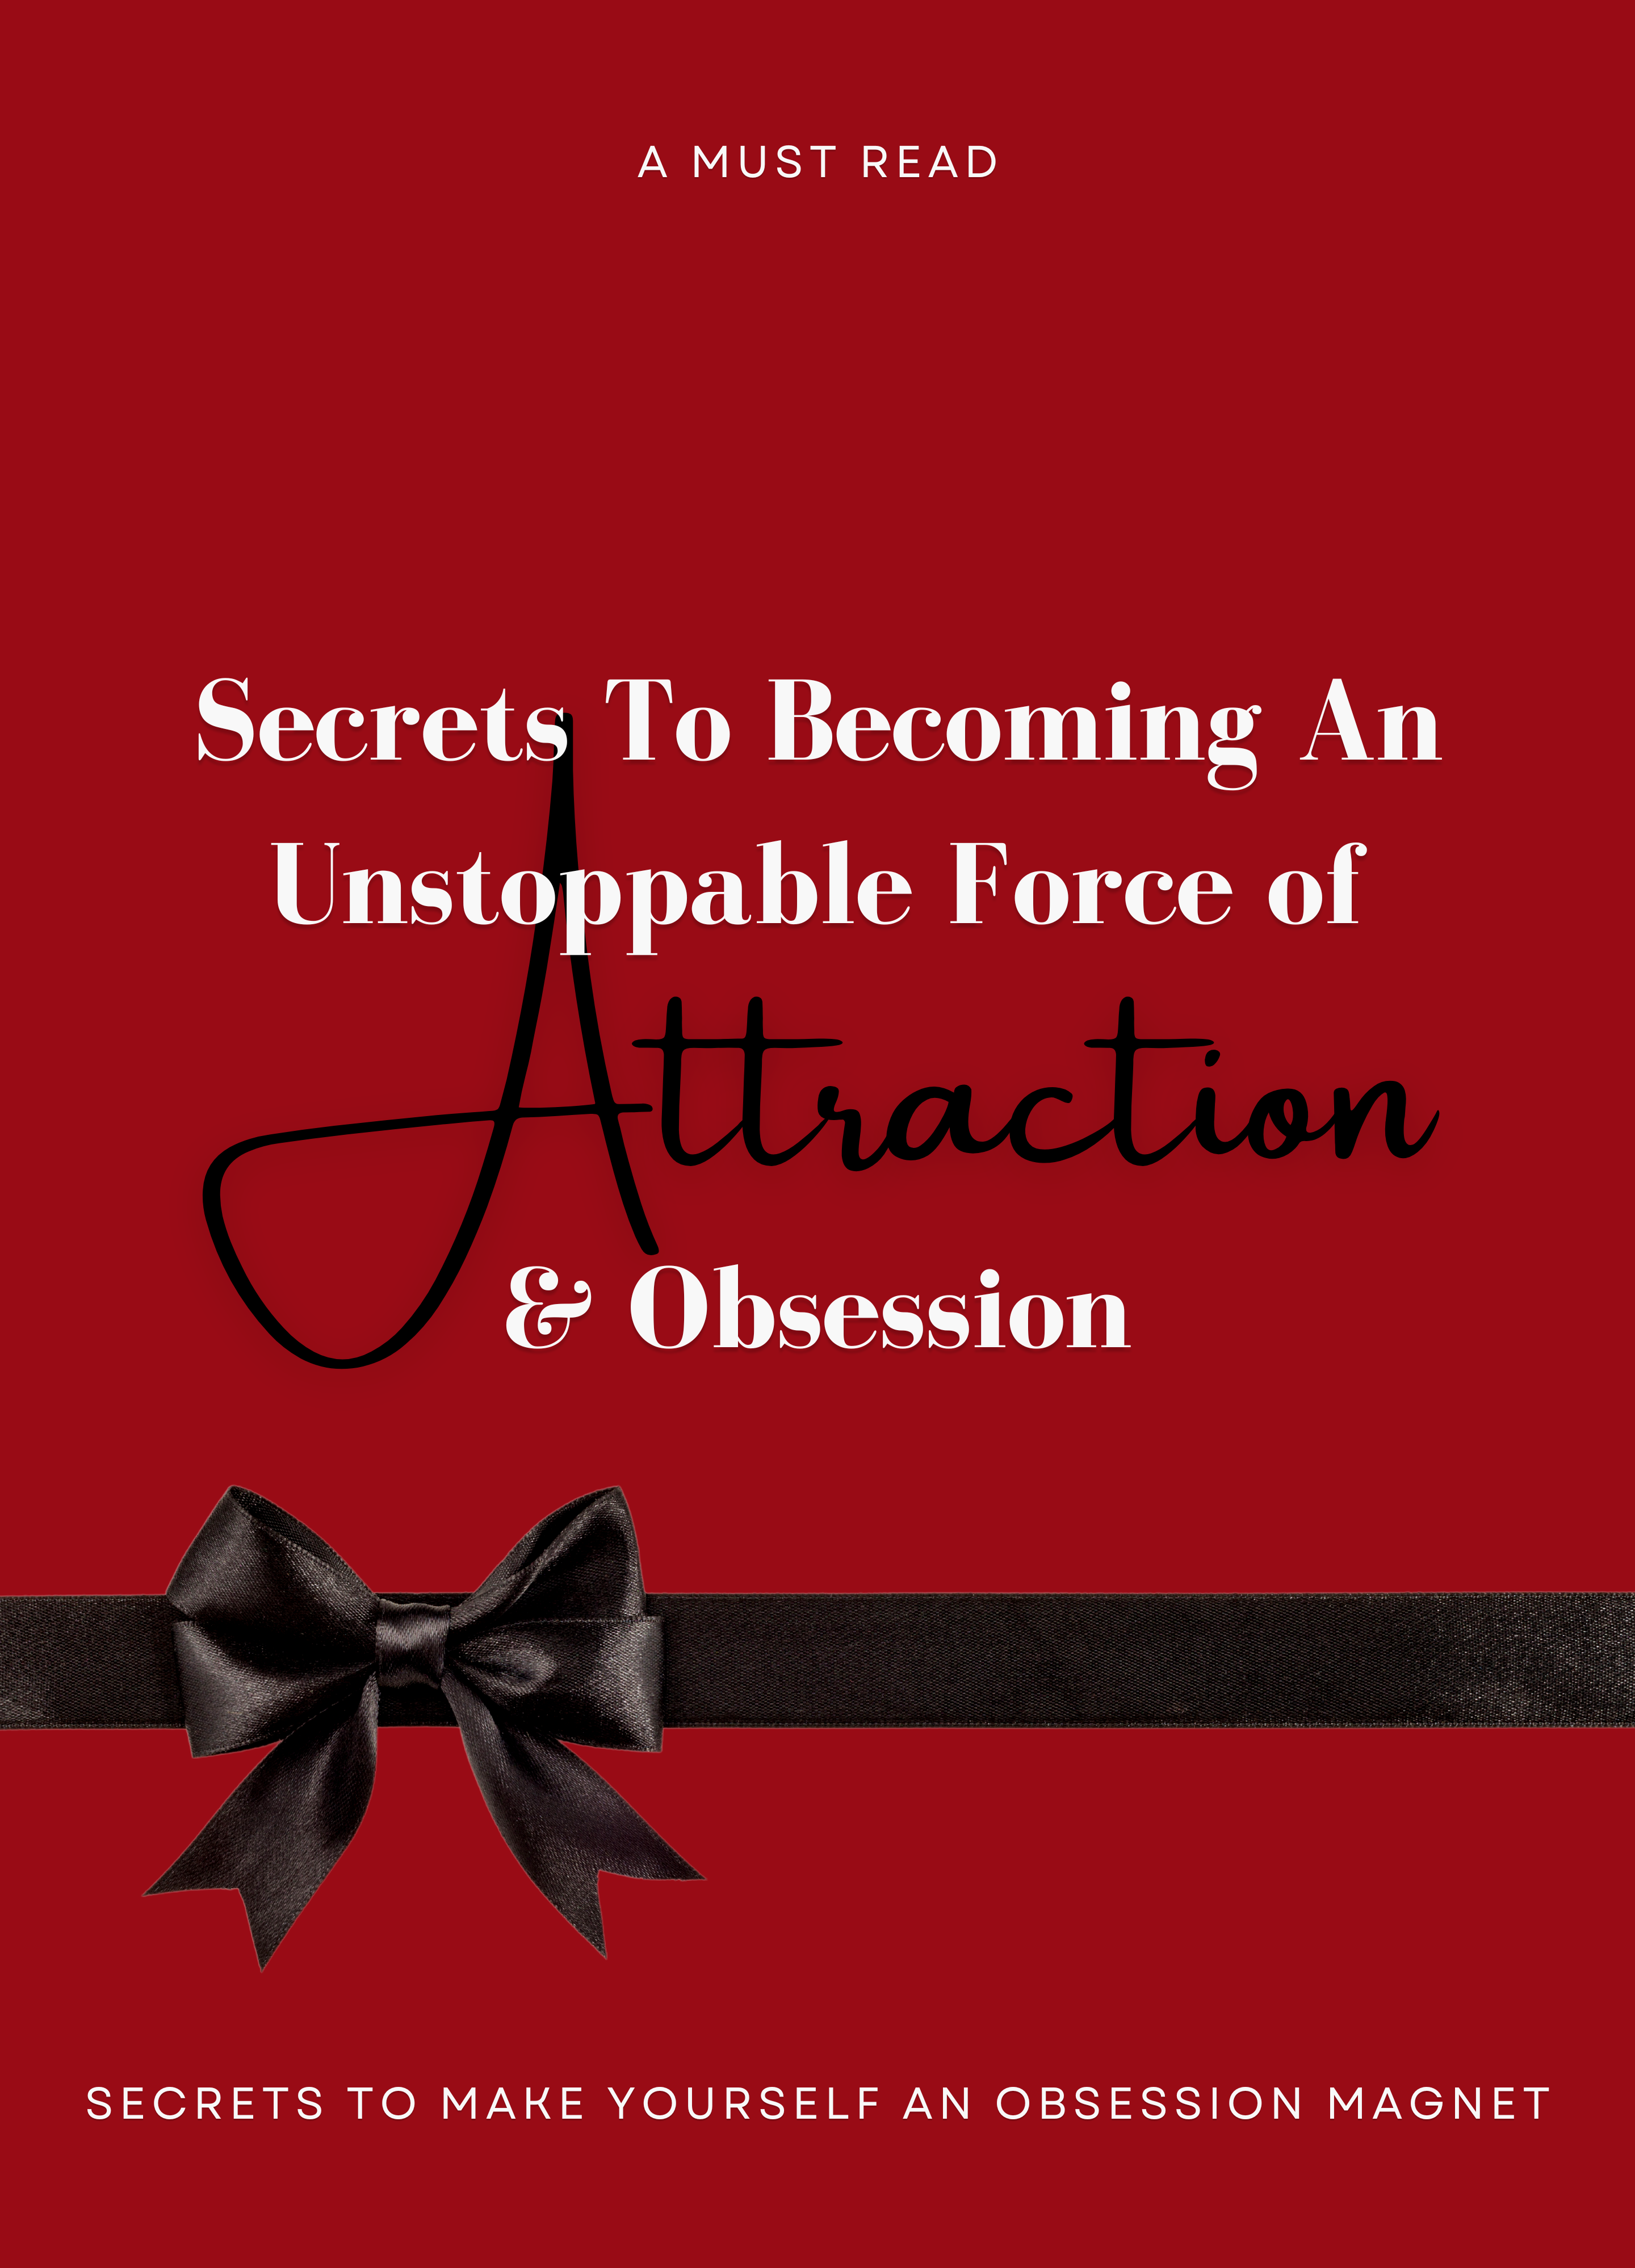 Secrets To Becoming An Unstoppable Force Of Attraction & Obsession